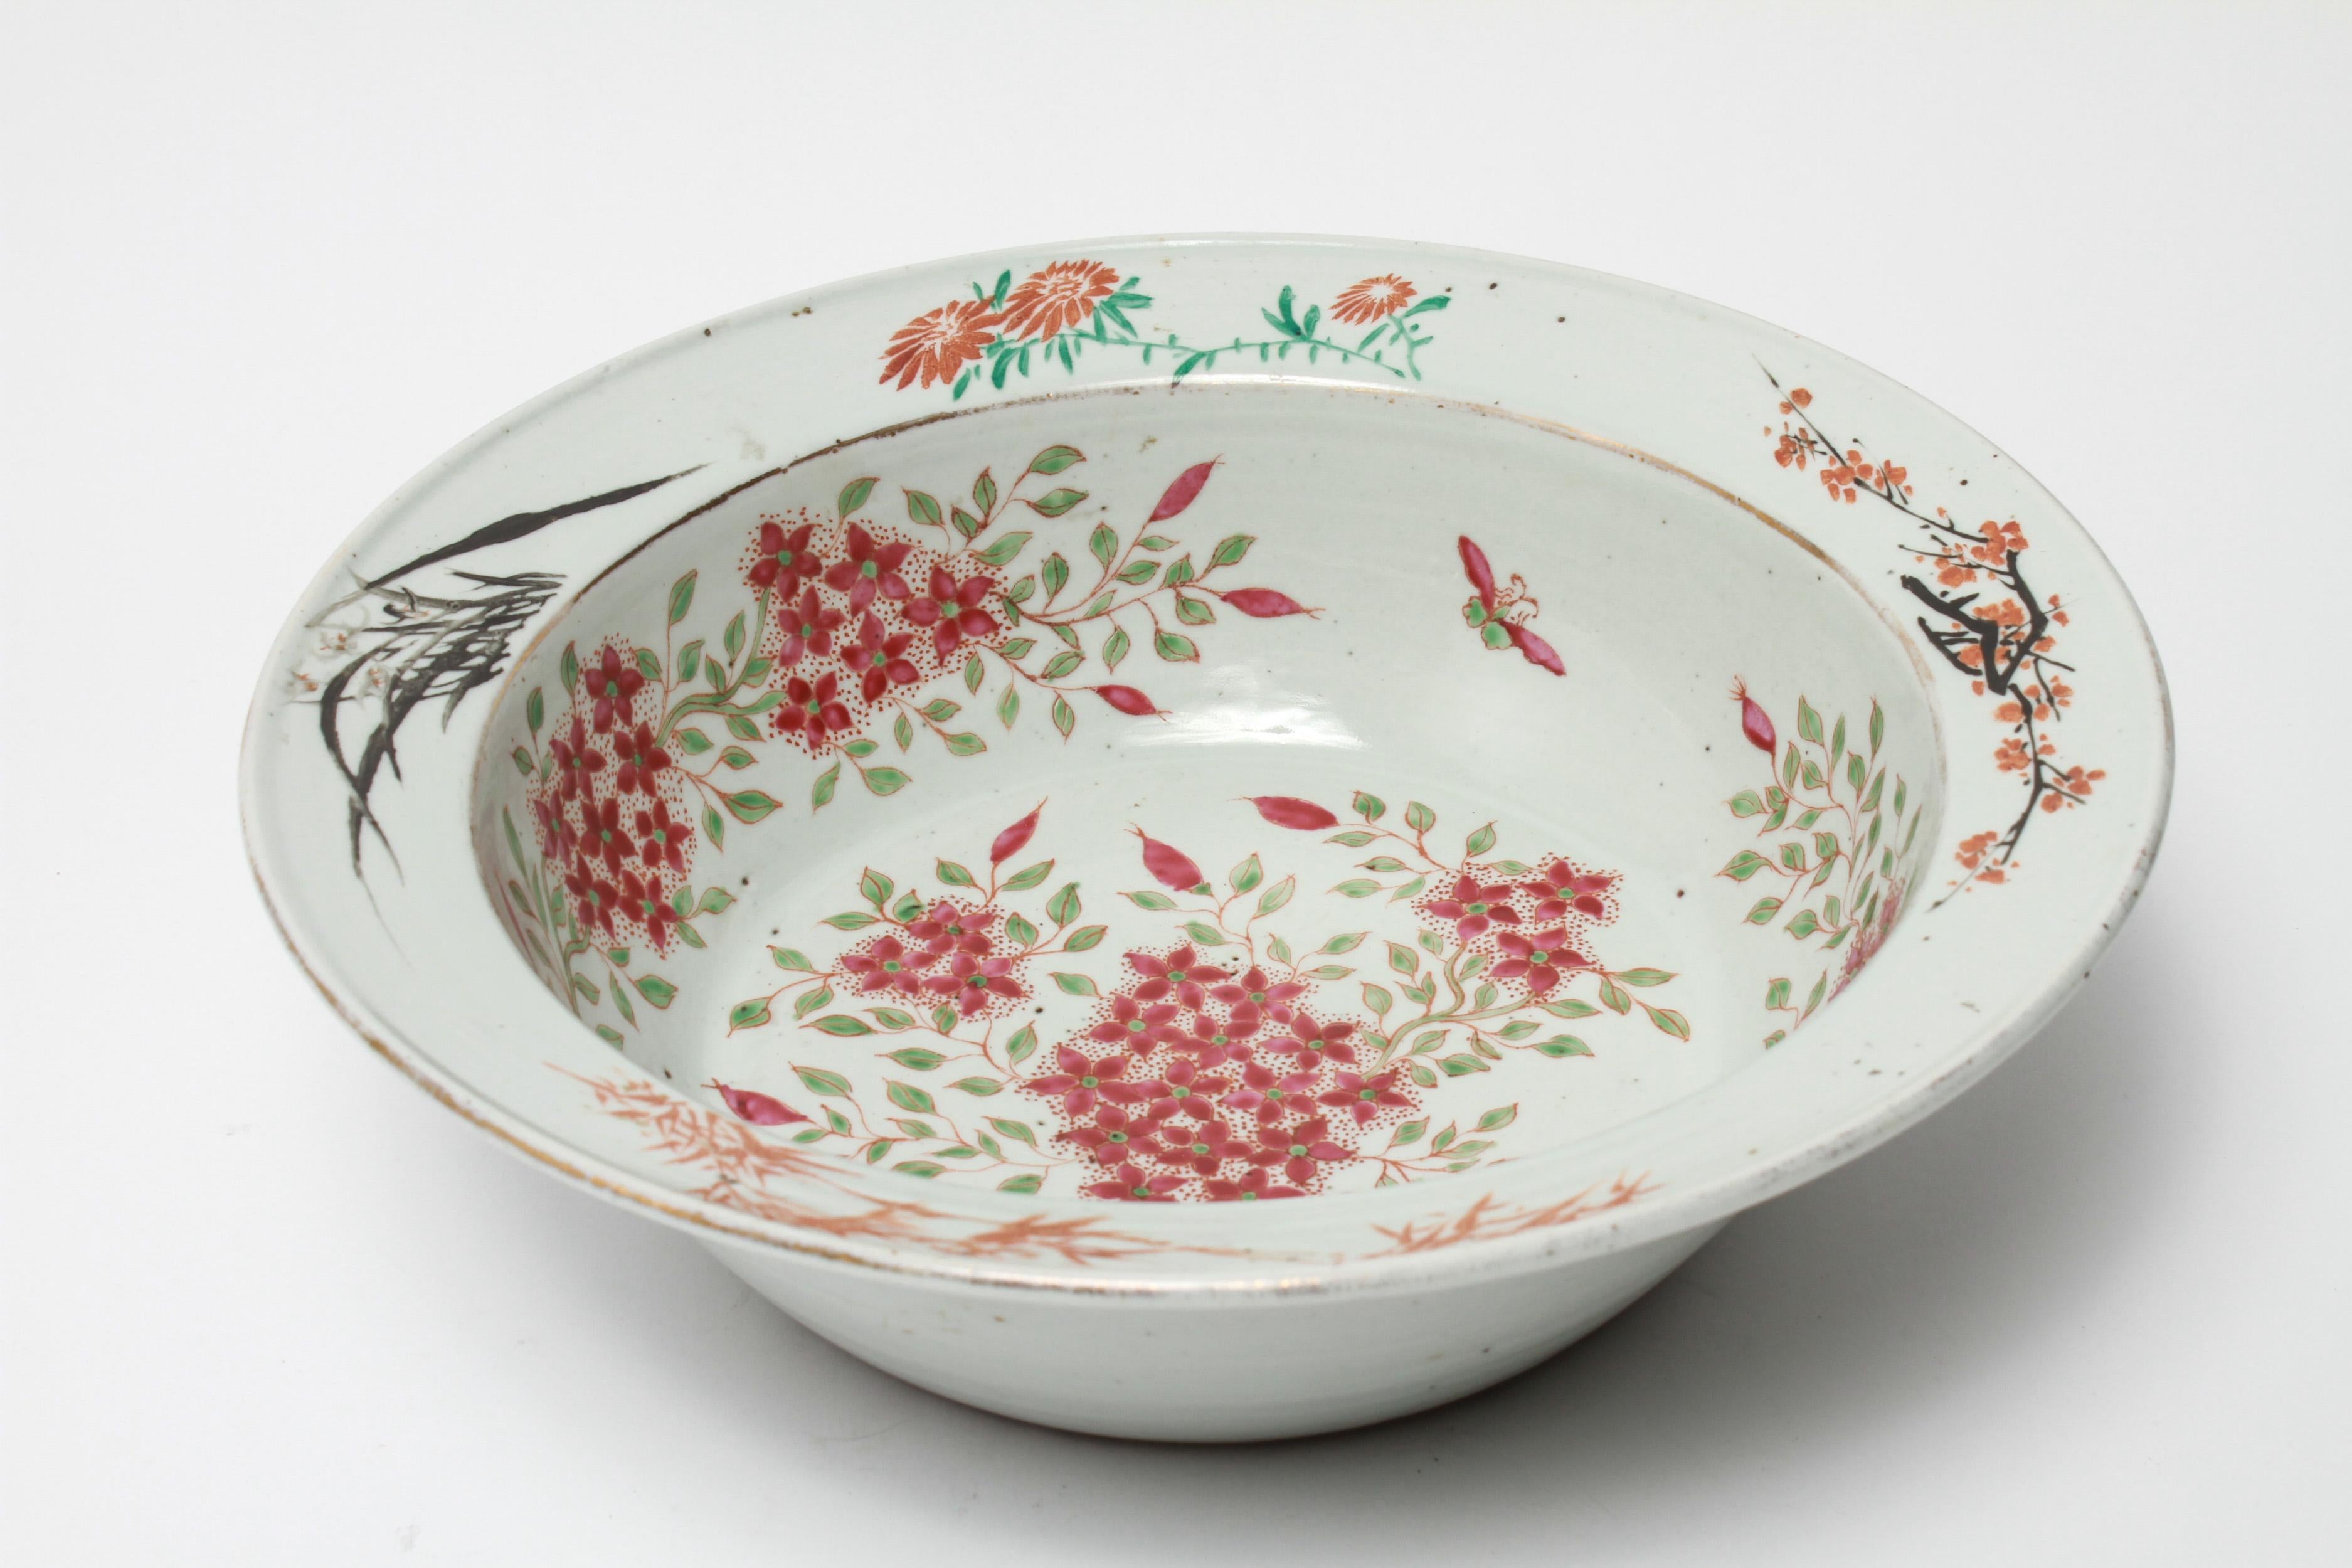 Chinese export Famille rose porcelain large bowl or basin. The piece has a polychrome floral motif and a gilt trim. In great vintage condition with age-appropriate wear and wear to the gilt trim.